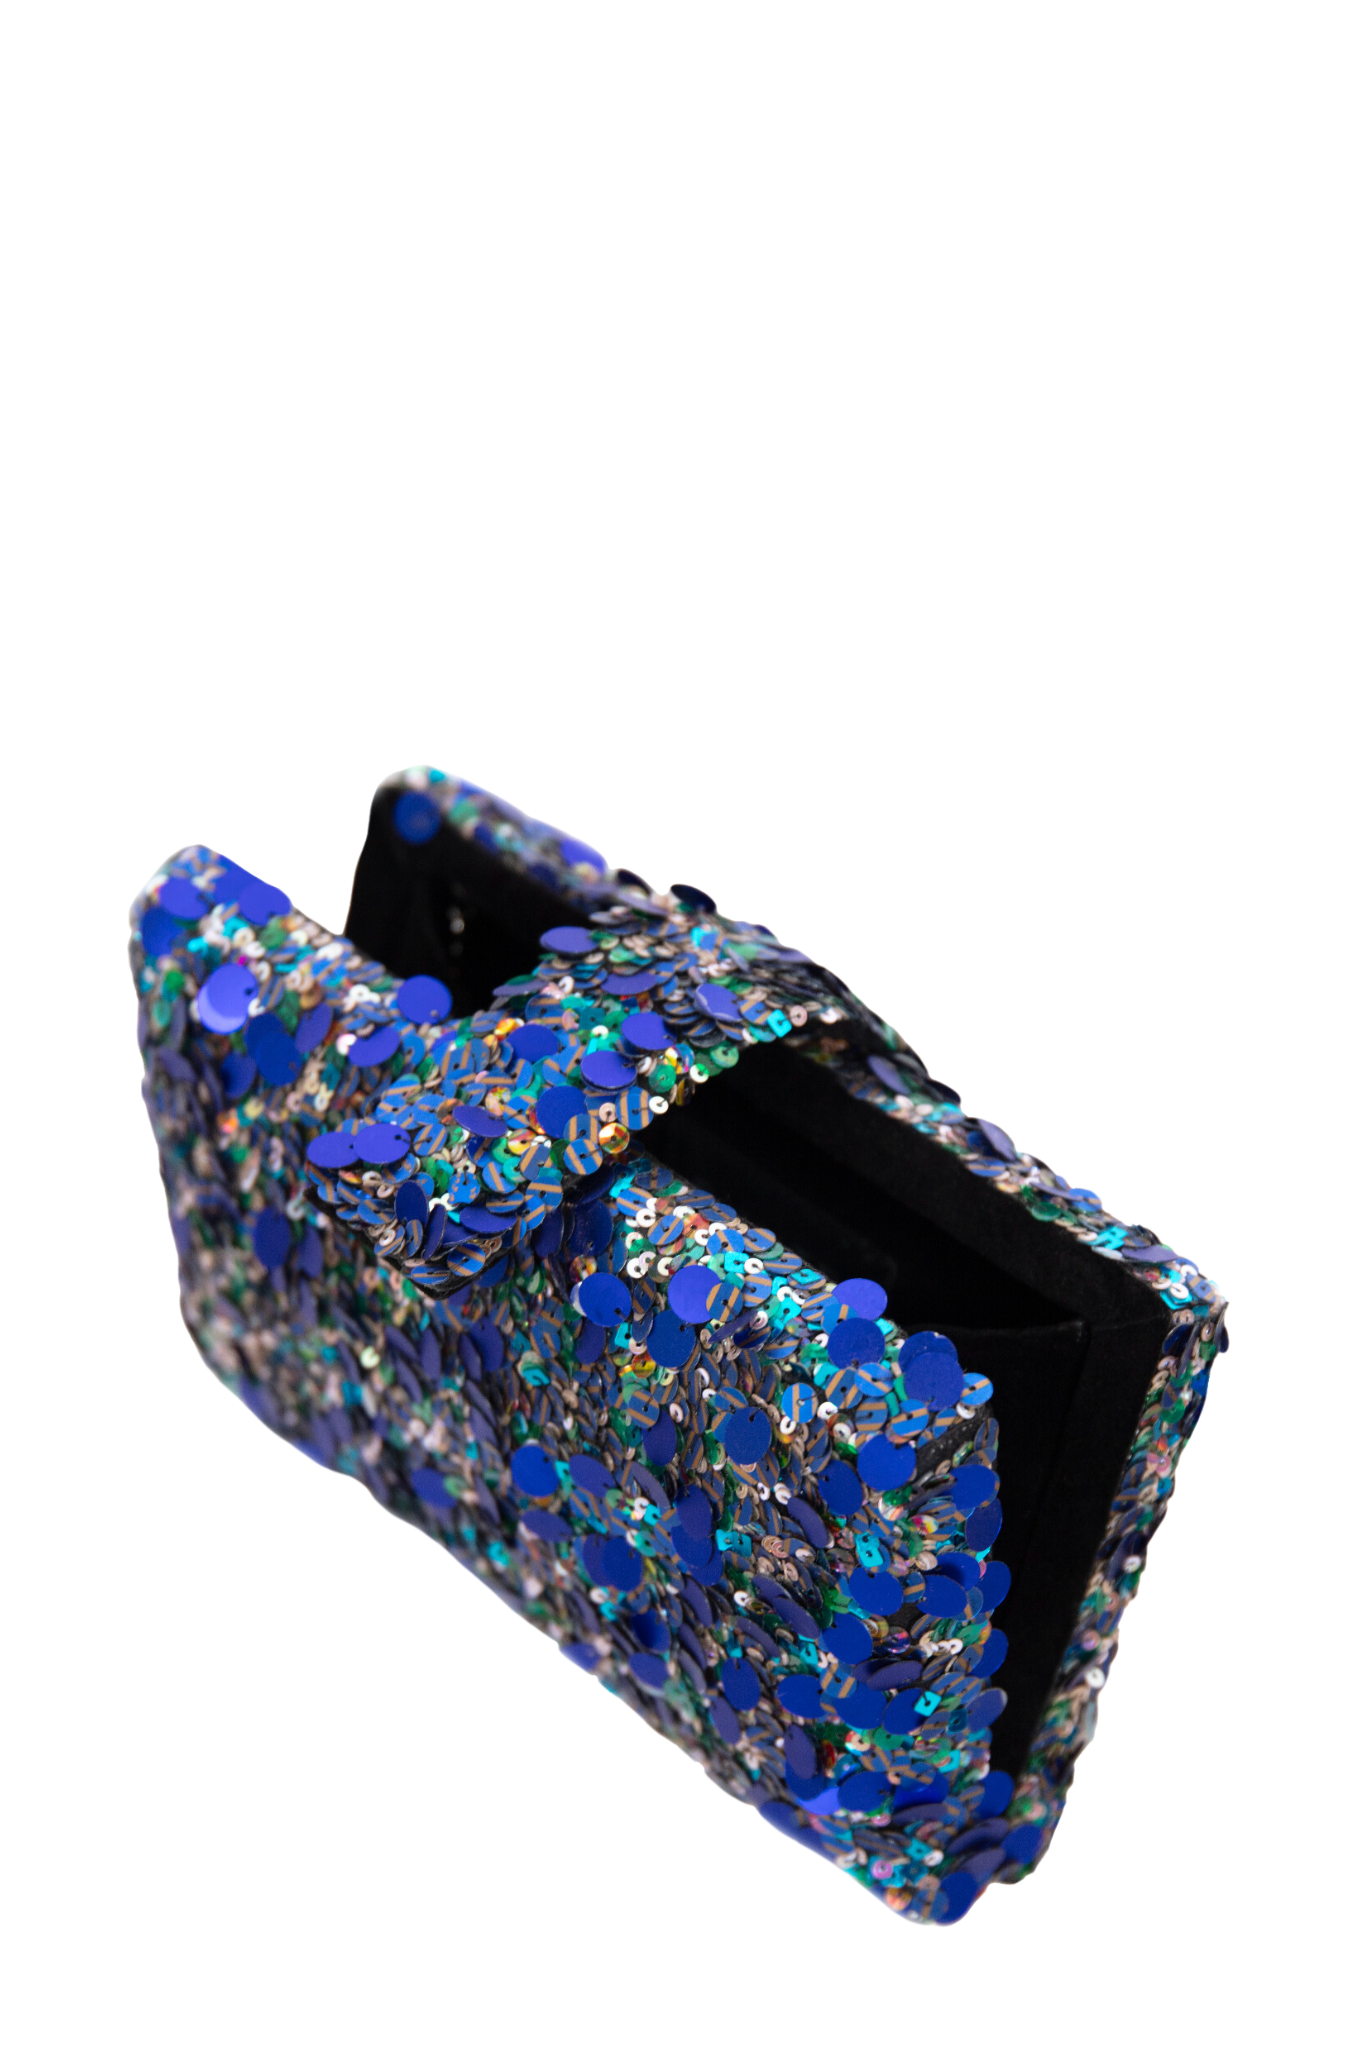 Peacock Beaded Clutch by Simitri Designs - RENTAL